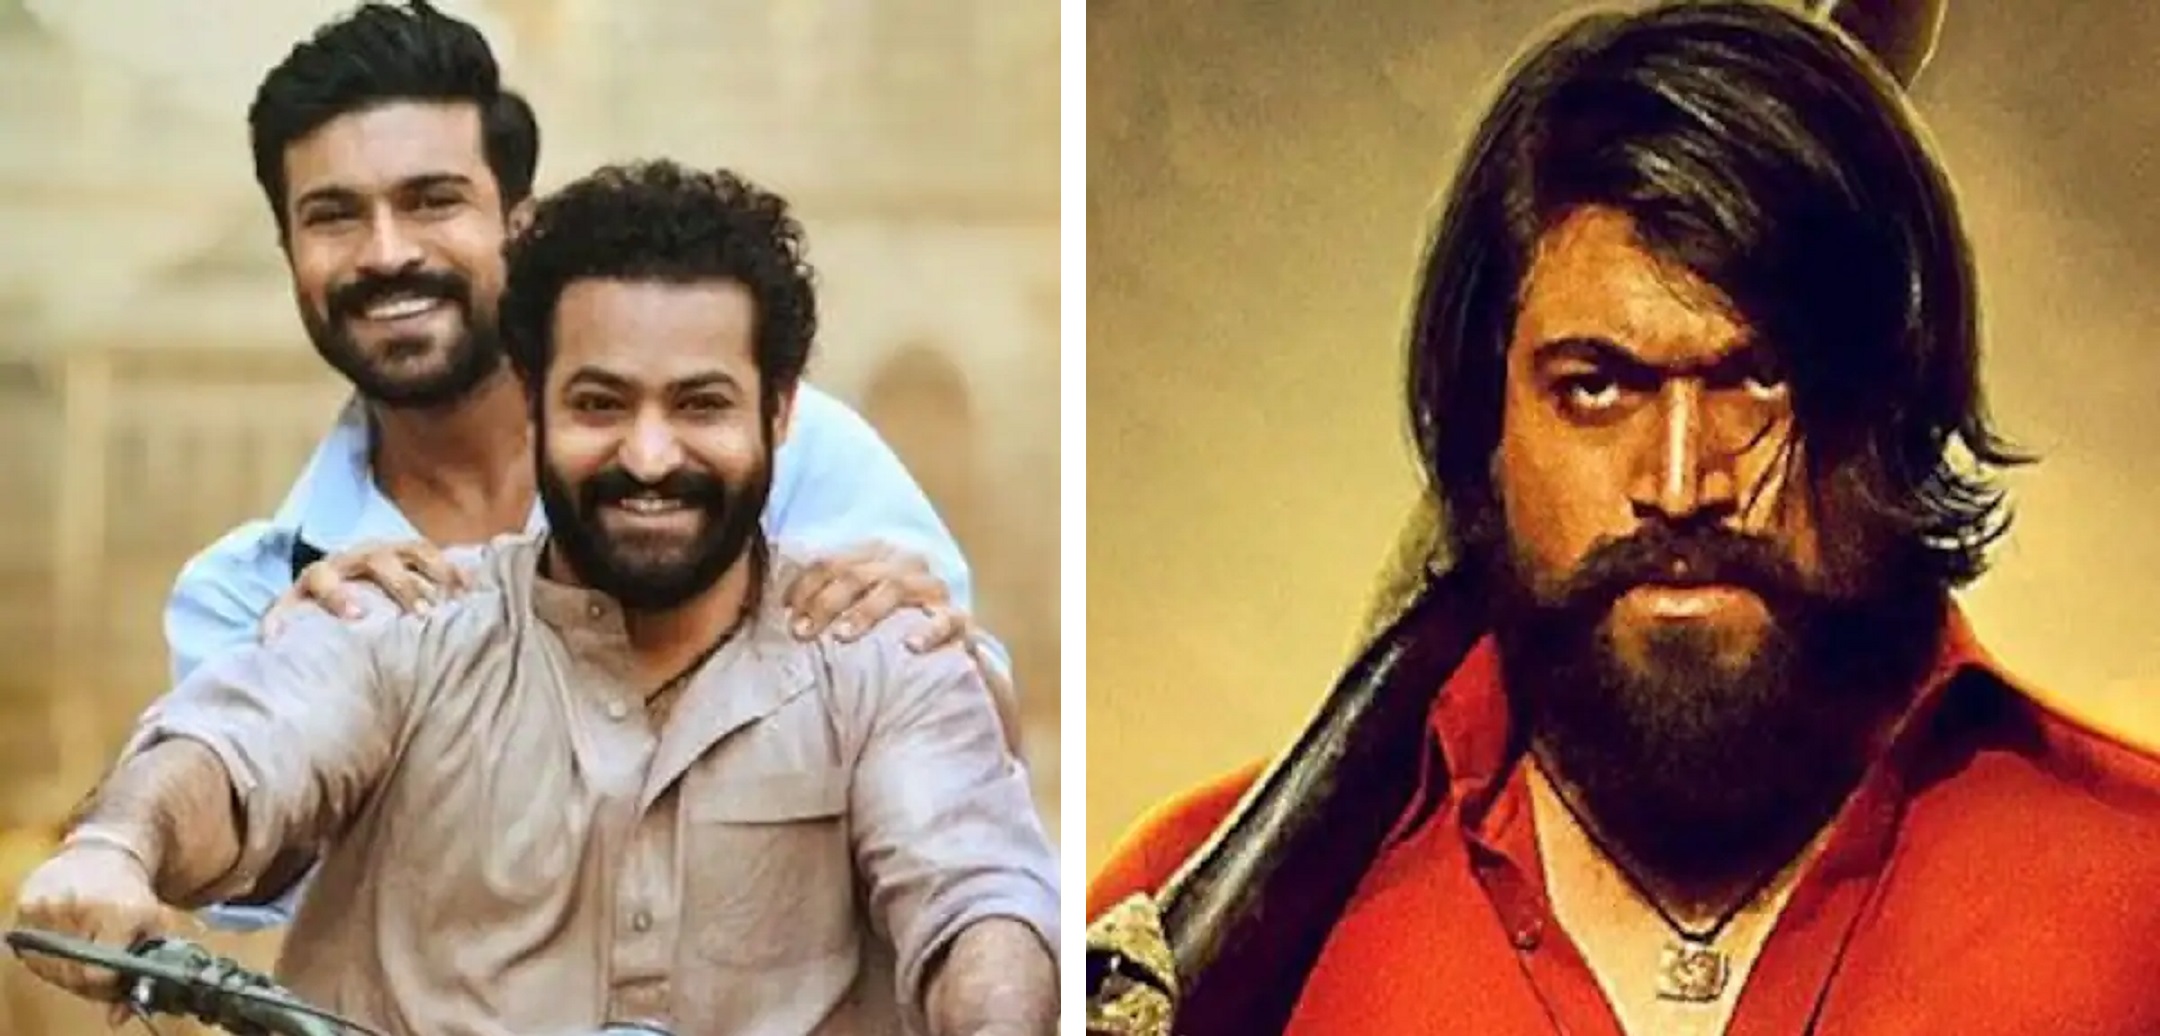 A Month After It’s Releases, KGF 2 Crosses 1200 Crore Mark, Surpasses RRR At The Box Office